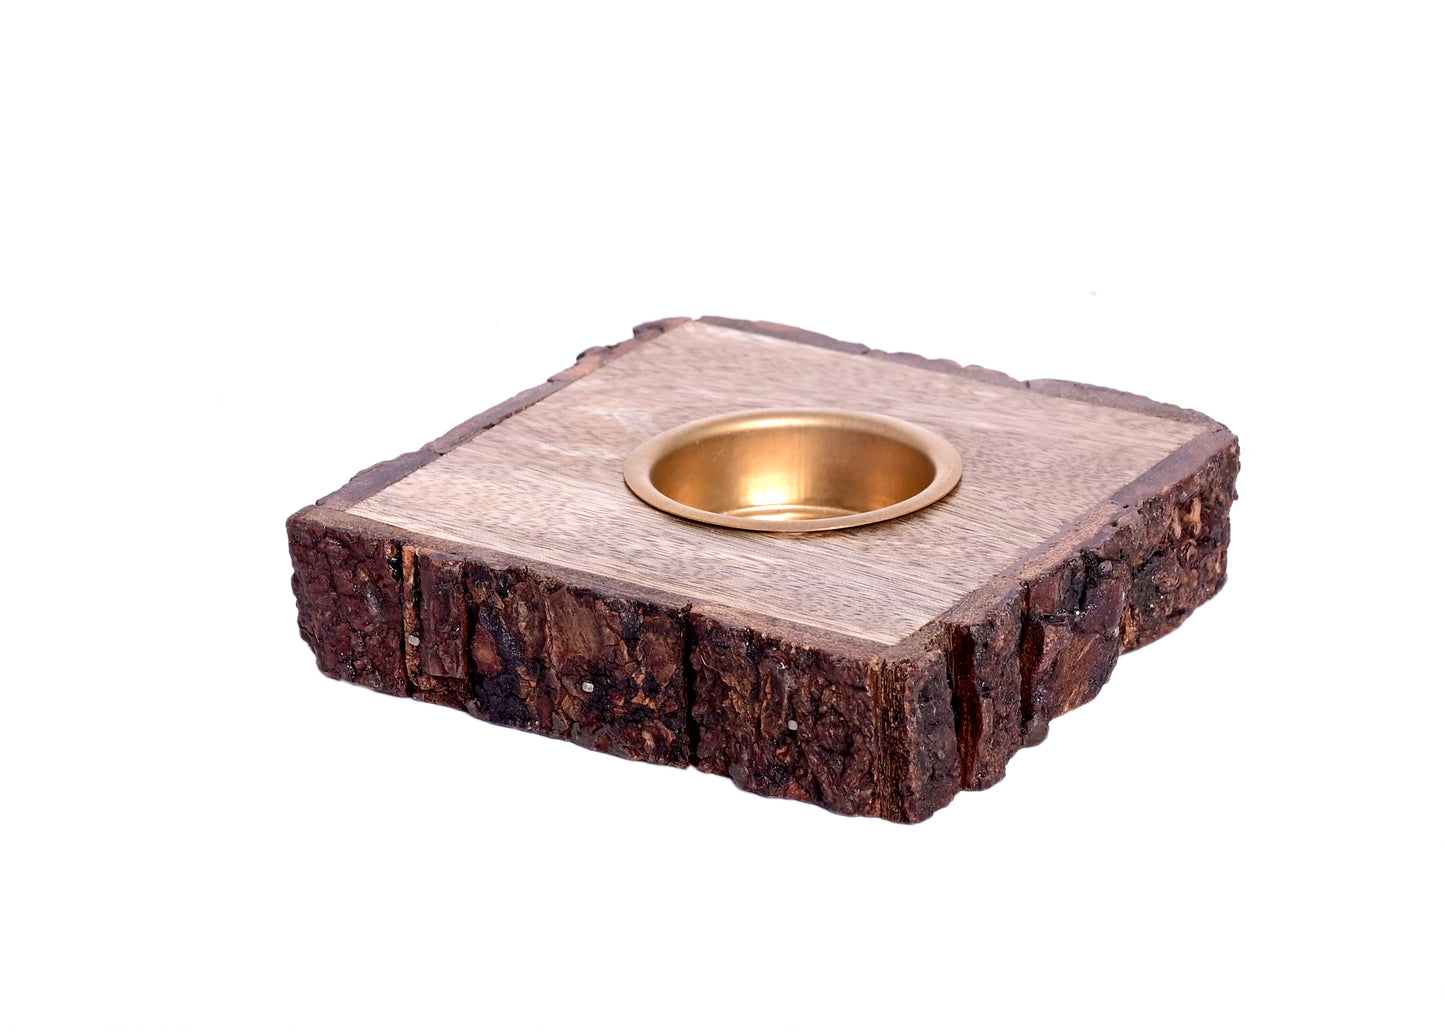 The Weaver's Nest Traditional Wooden Bark Handmade Tealight Candle Holder Set of Two for Home Decoration/ Festival Decor- Square Shaped Candle Stand